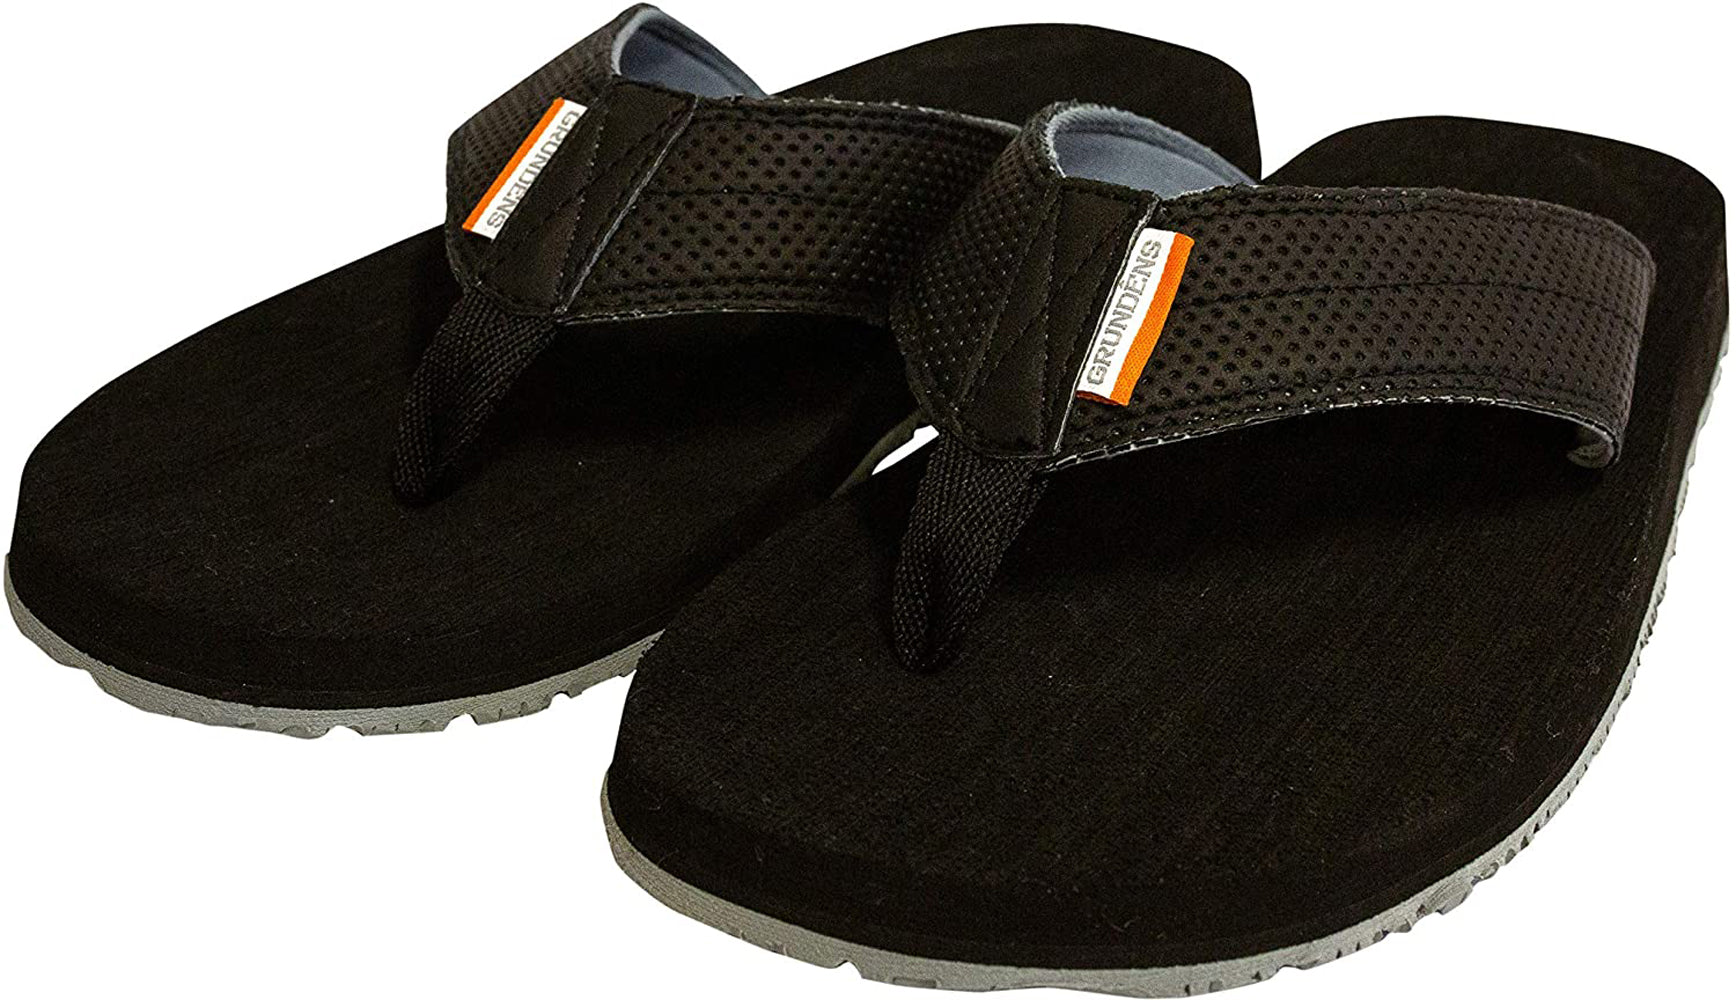 Deck Hand Sandal in Black color from the side view